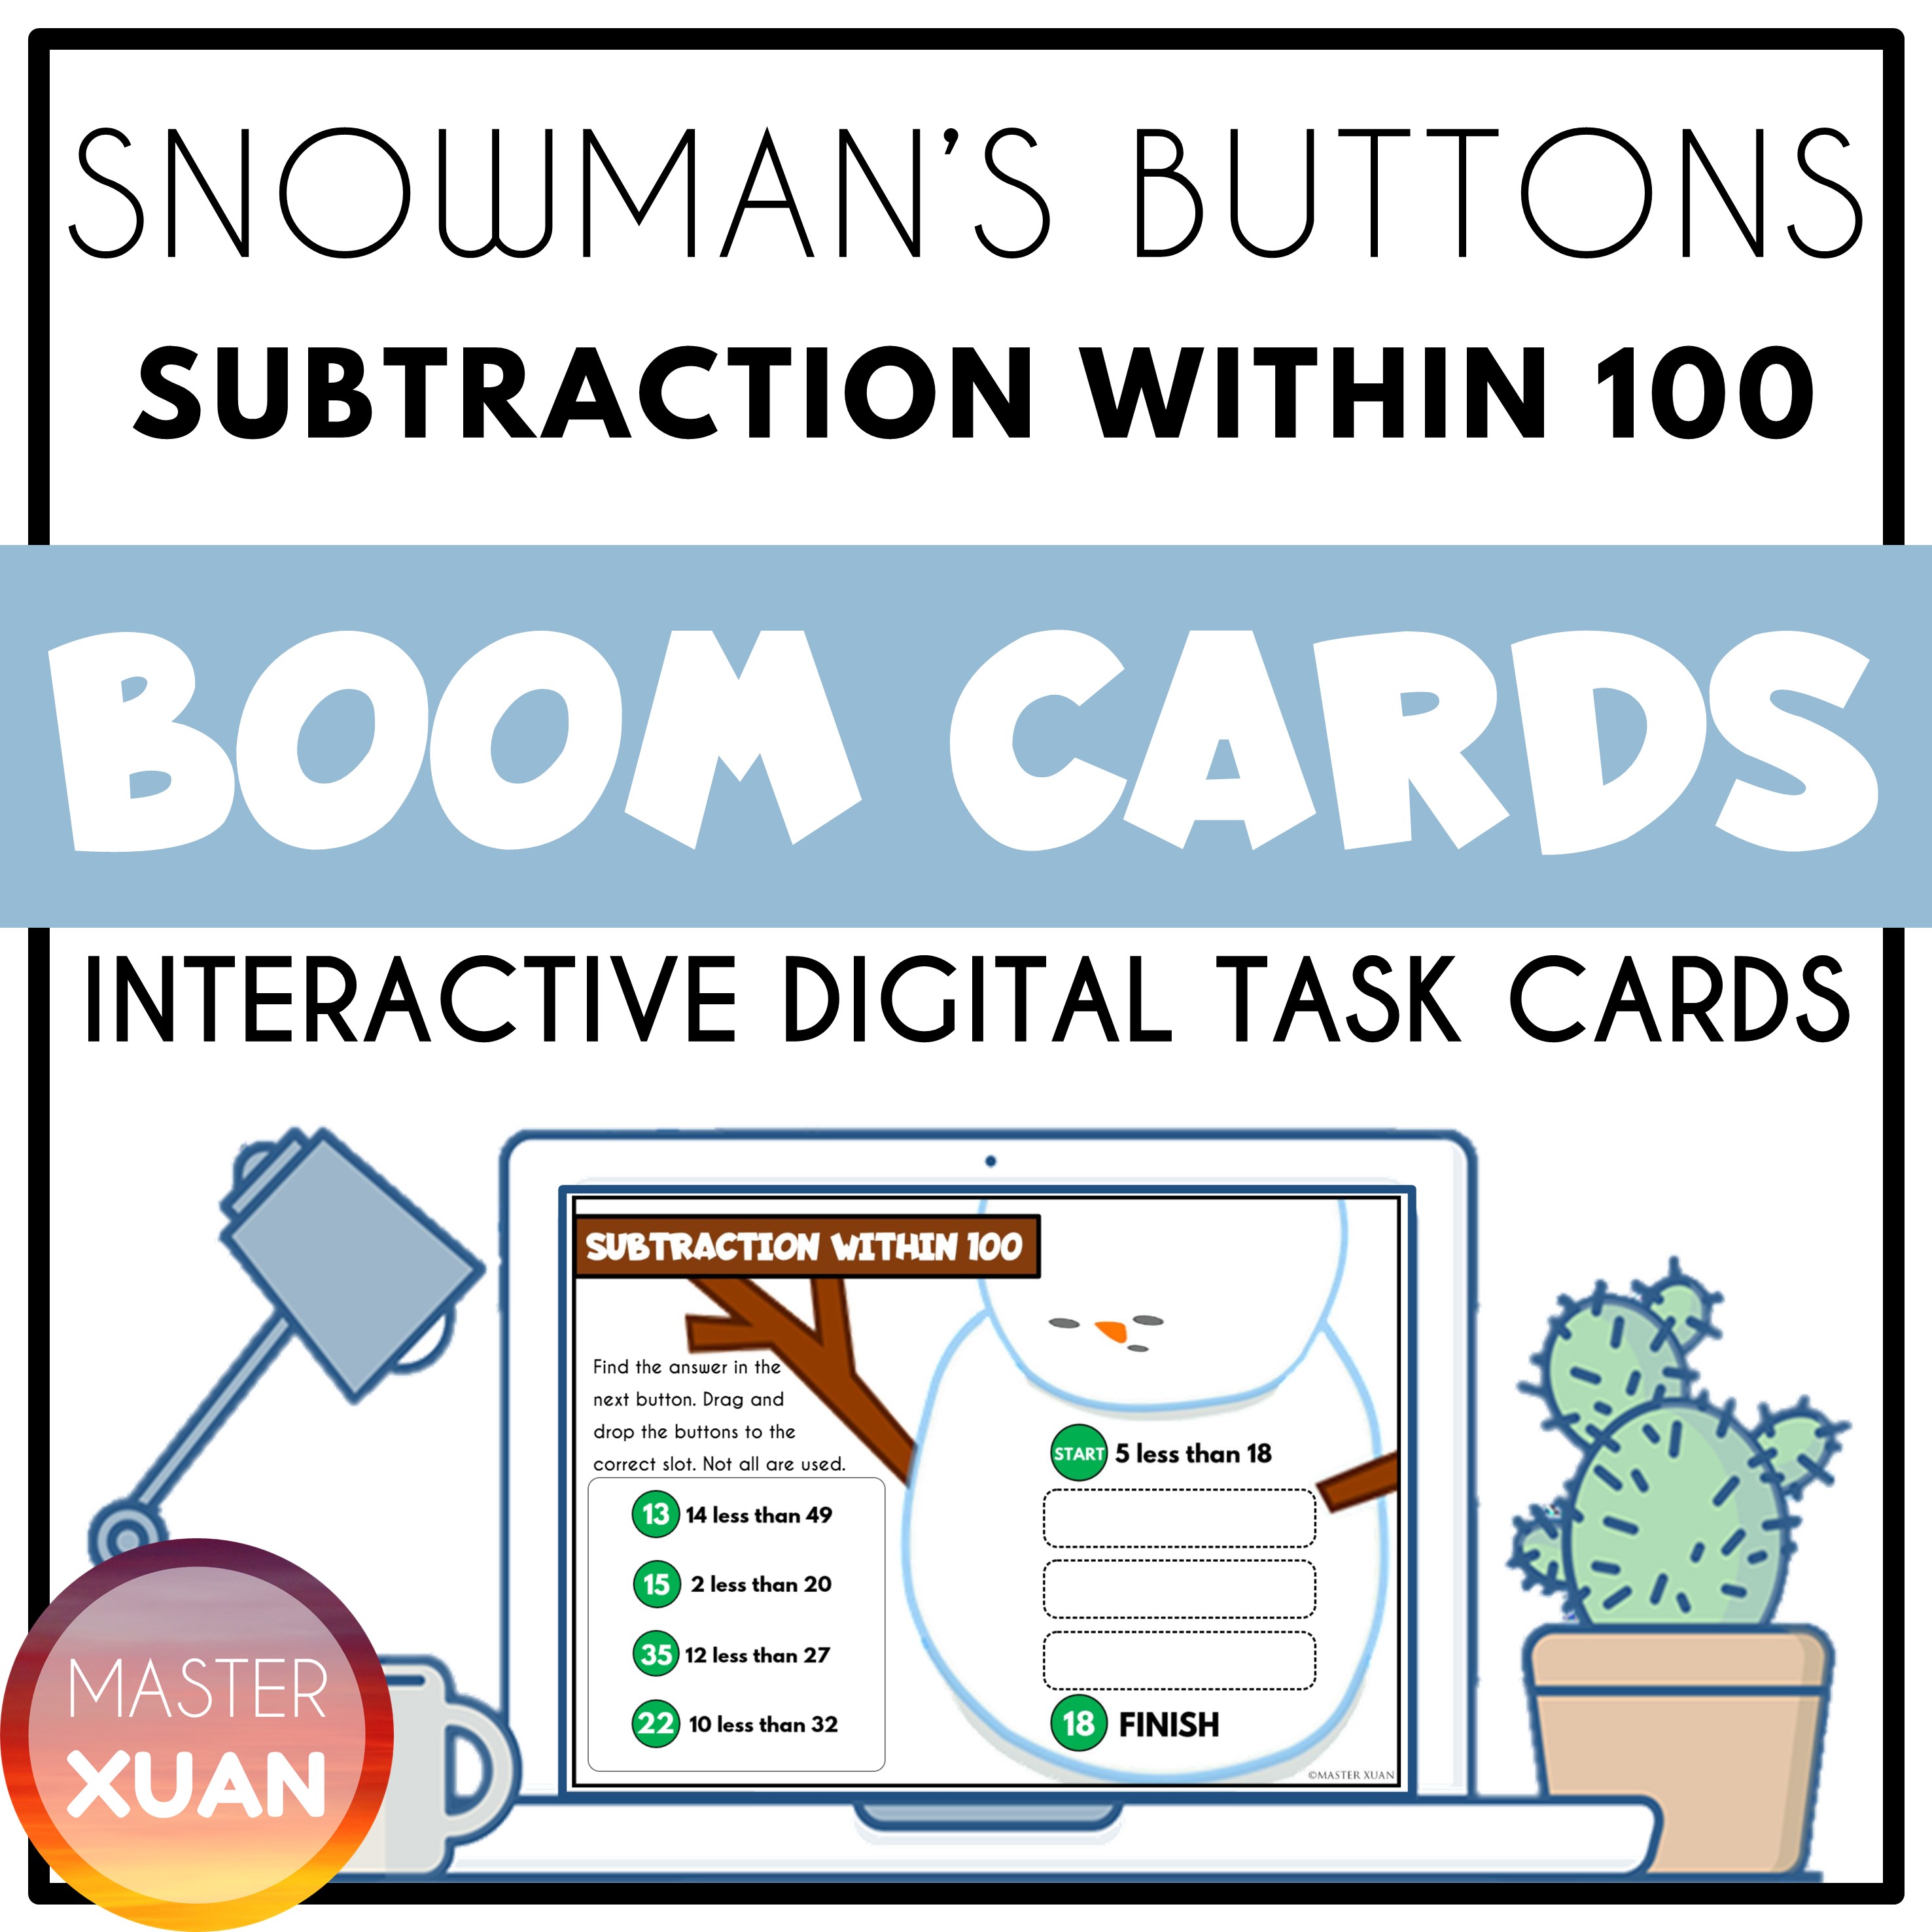 Subtraction up to 100 cover shows snowman's buttons subtraction within 100